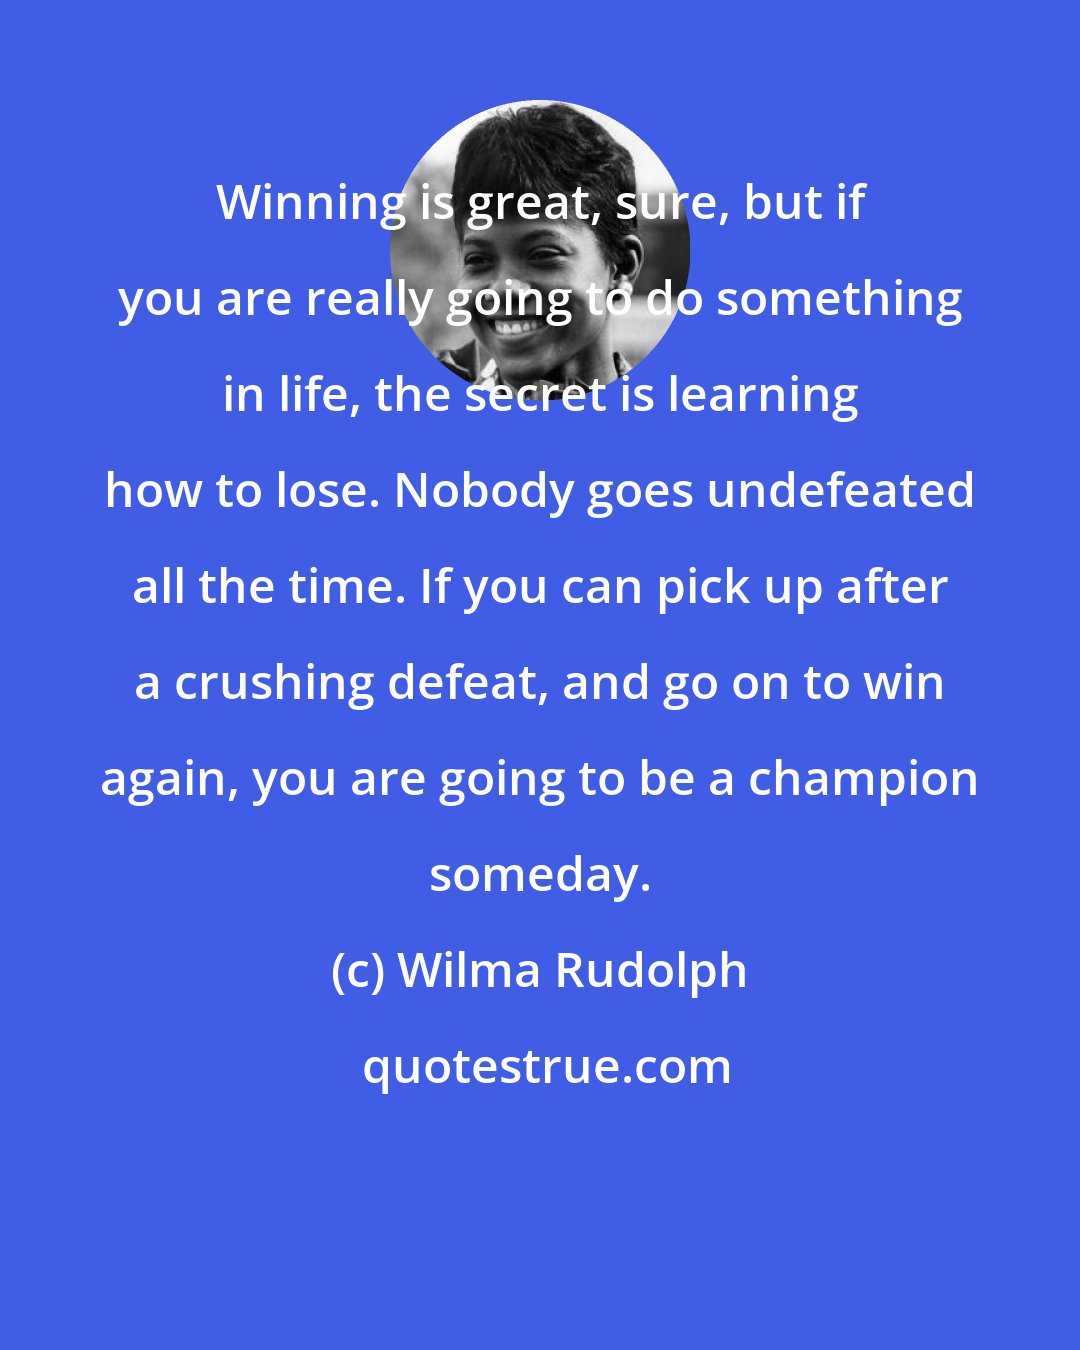 Wilma Rudolph: Winning is great, sure, but if you are really going to do something in life, the secret is learning how to lose. Nobody goes undefeated all the time. If you can pick up after a crushing defeat, and go on to win again, you are going to be a champion someday.